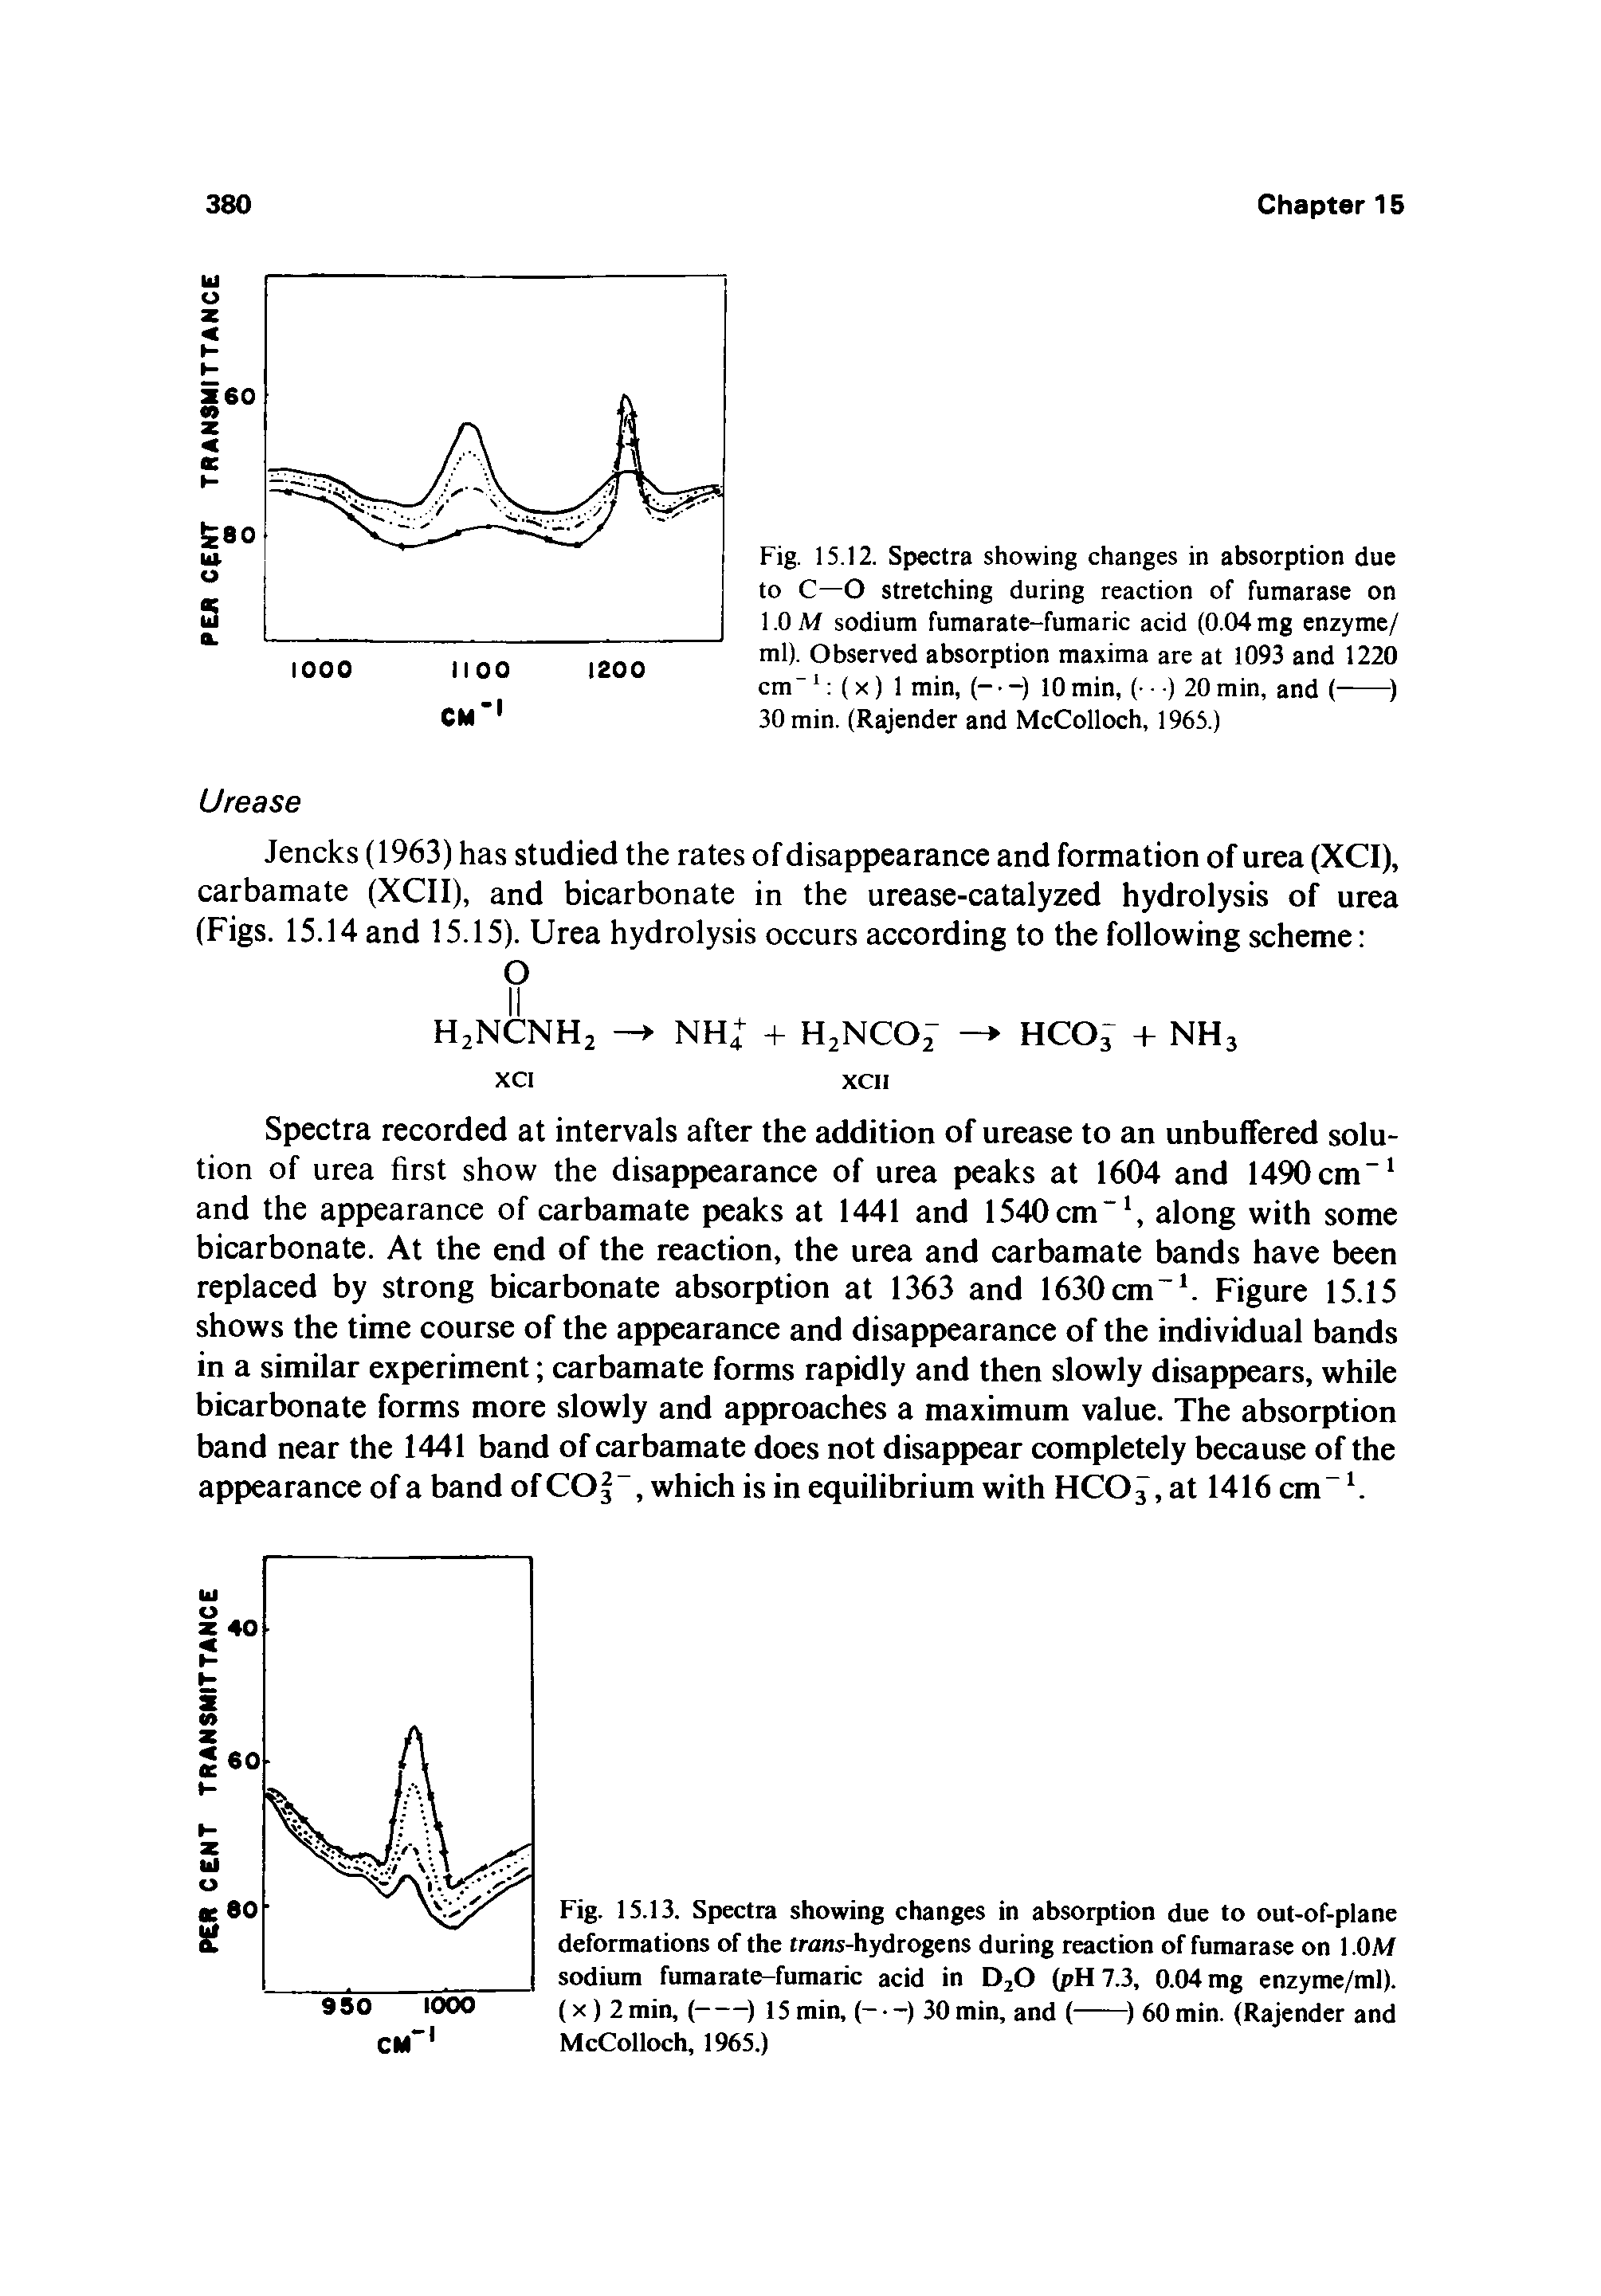 Fig. IS. 12. Spectra showing changes in absorption due to C—O stretching during reaction of fumarase on 1.0 Af sodium fumarate-fumaric acid (0.04 mg enzyme/ ml). Observed absorption maxima are at 1093 and 1220...